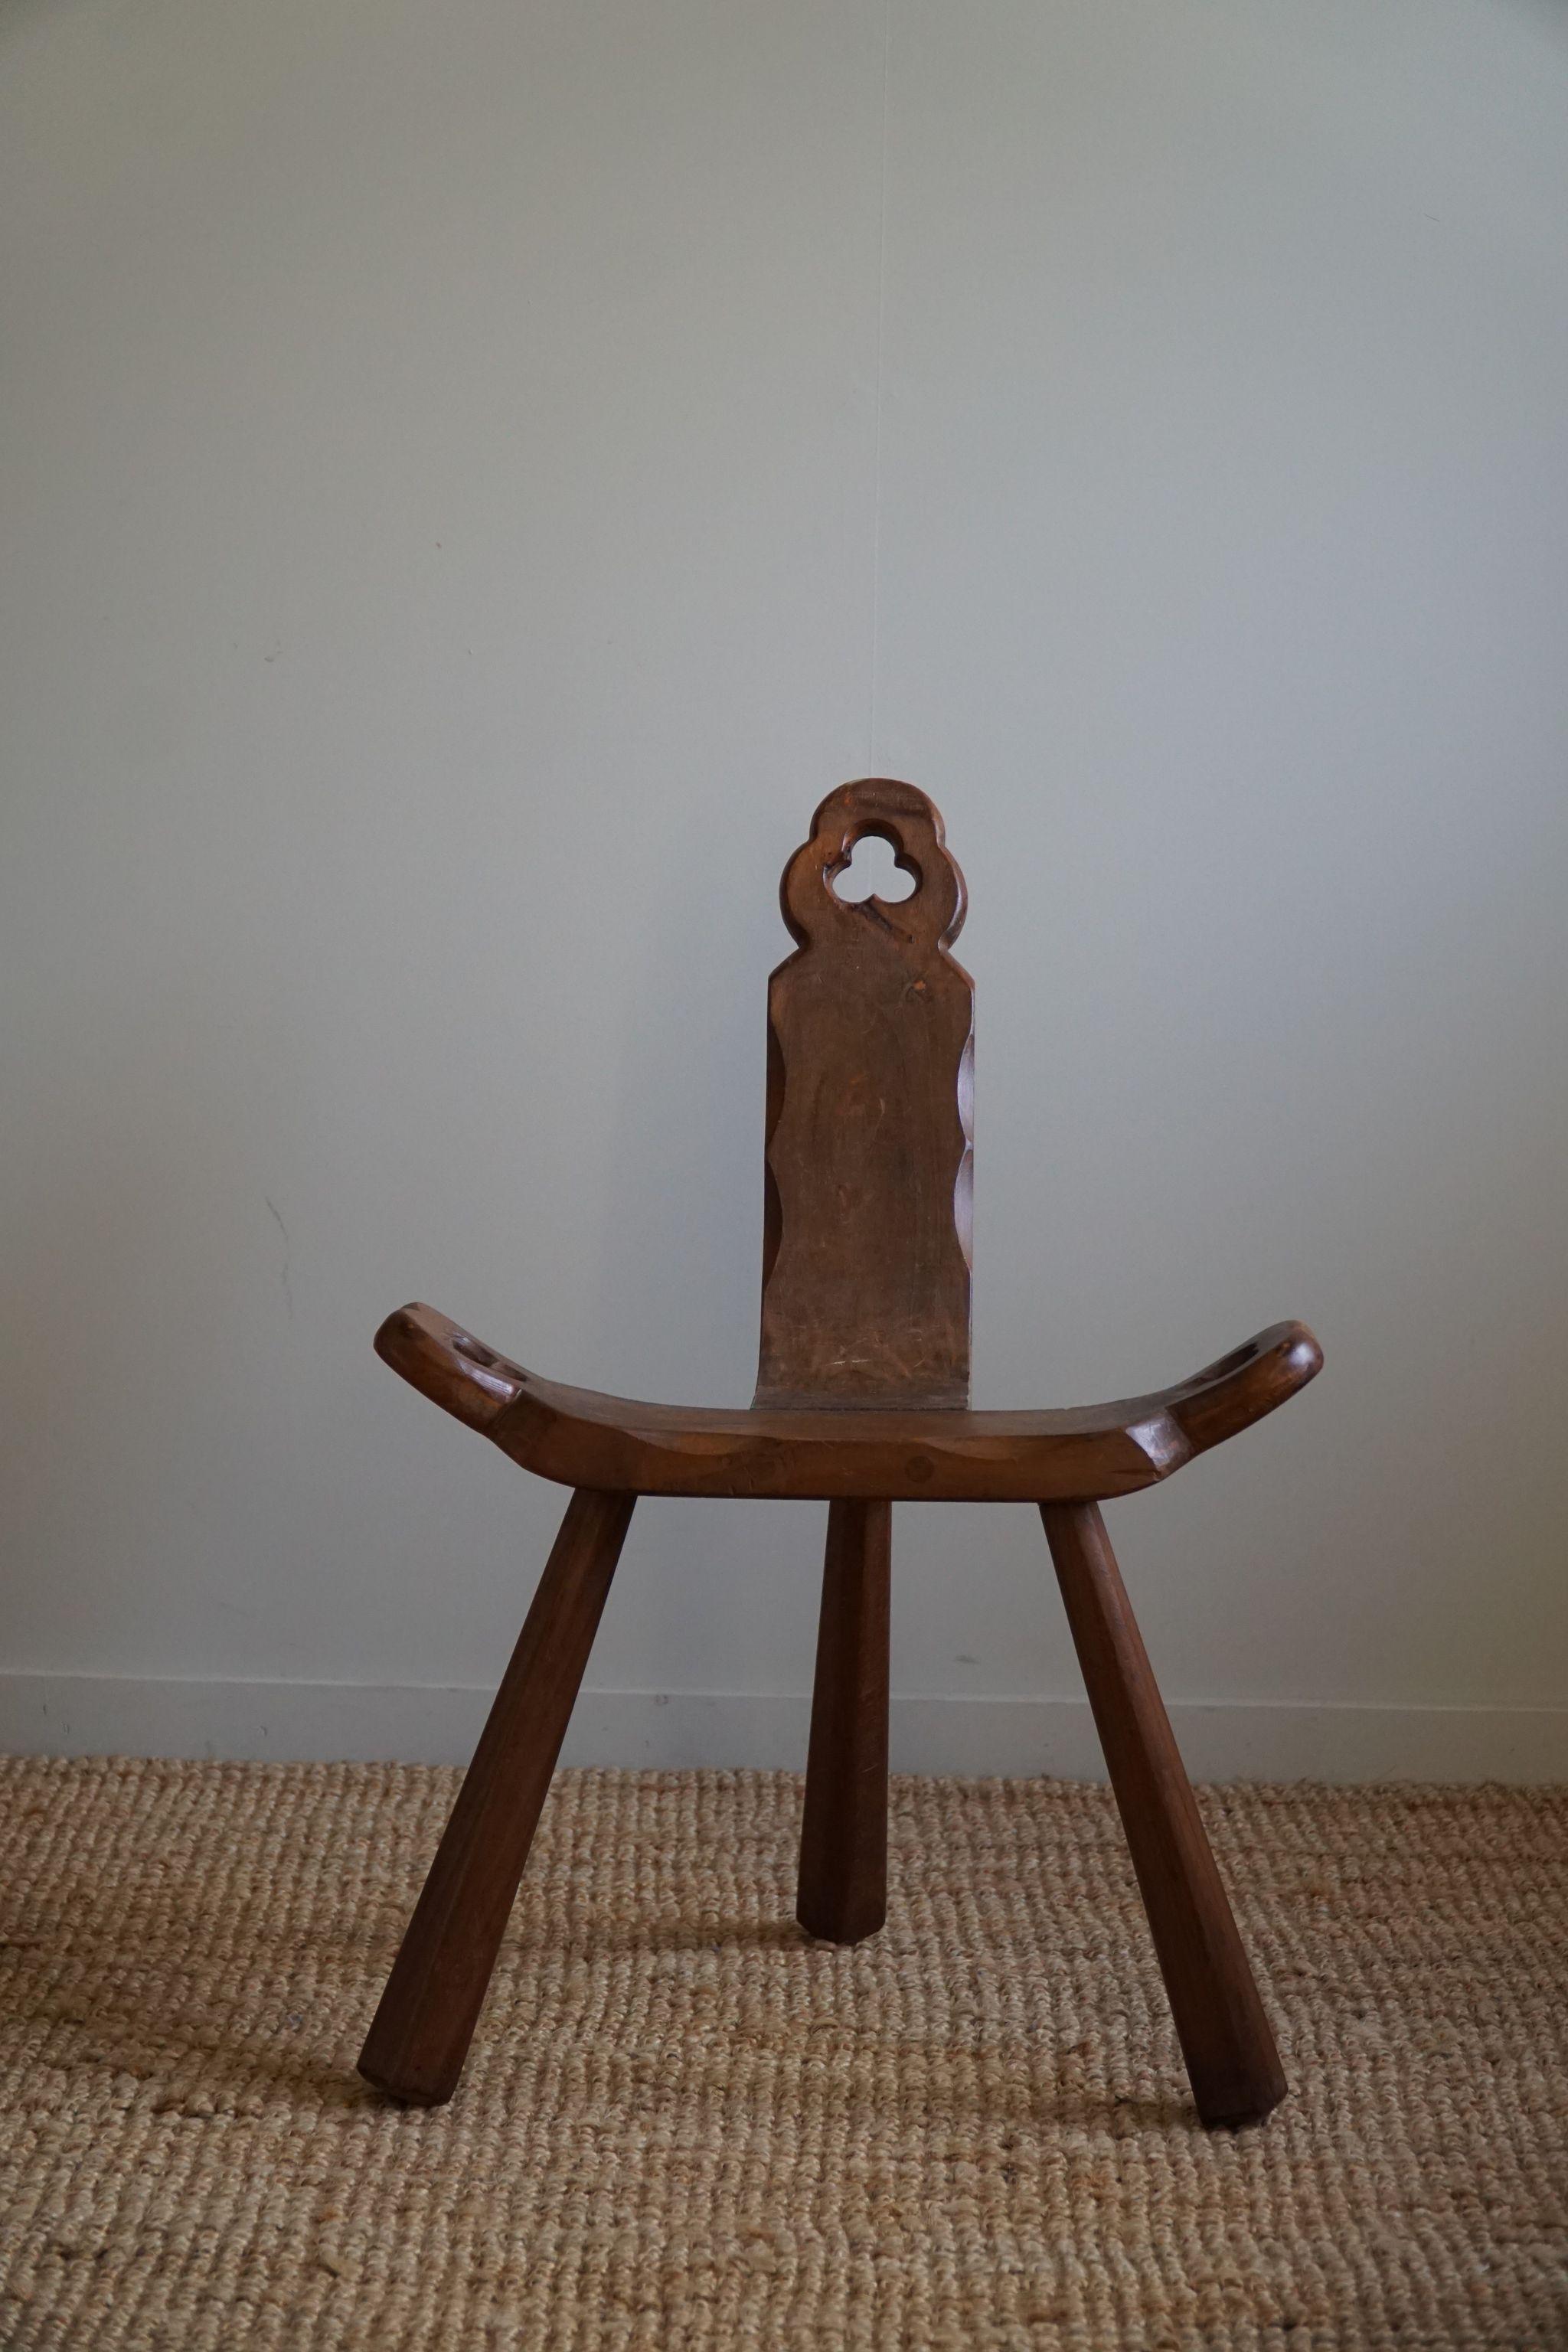 Primitive French Wooden Carved Tripod Chair, Wabi Sabi Style, Early 20th Century 5